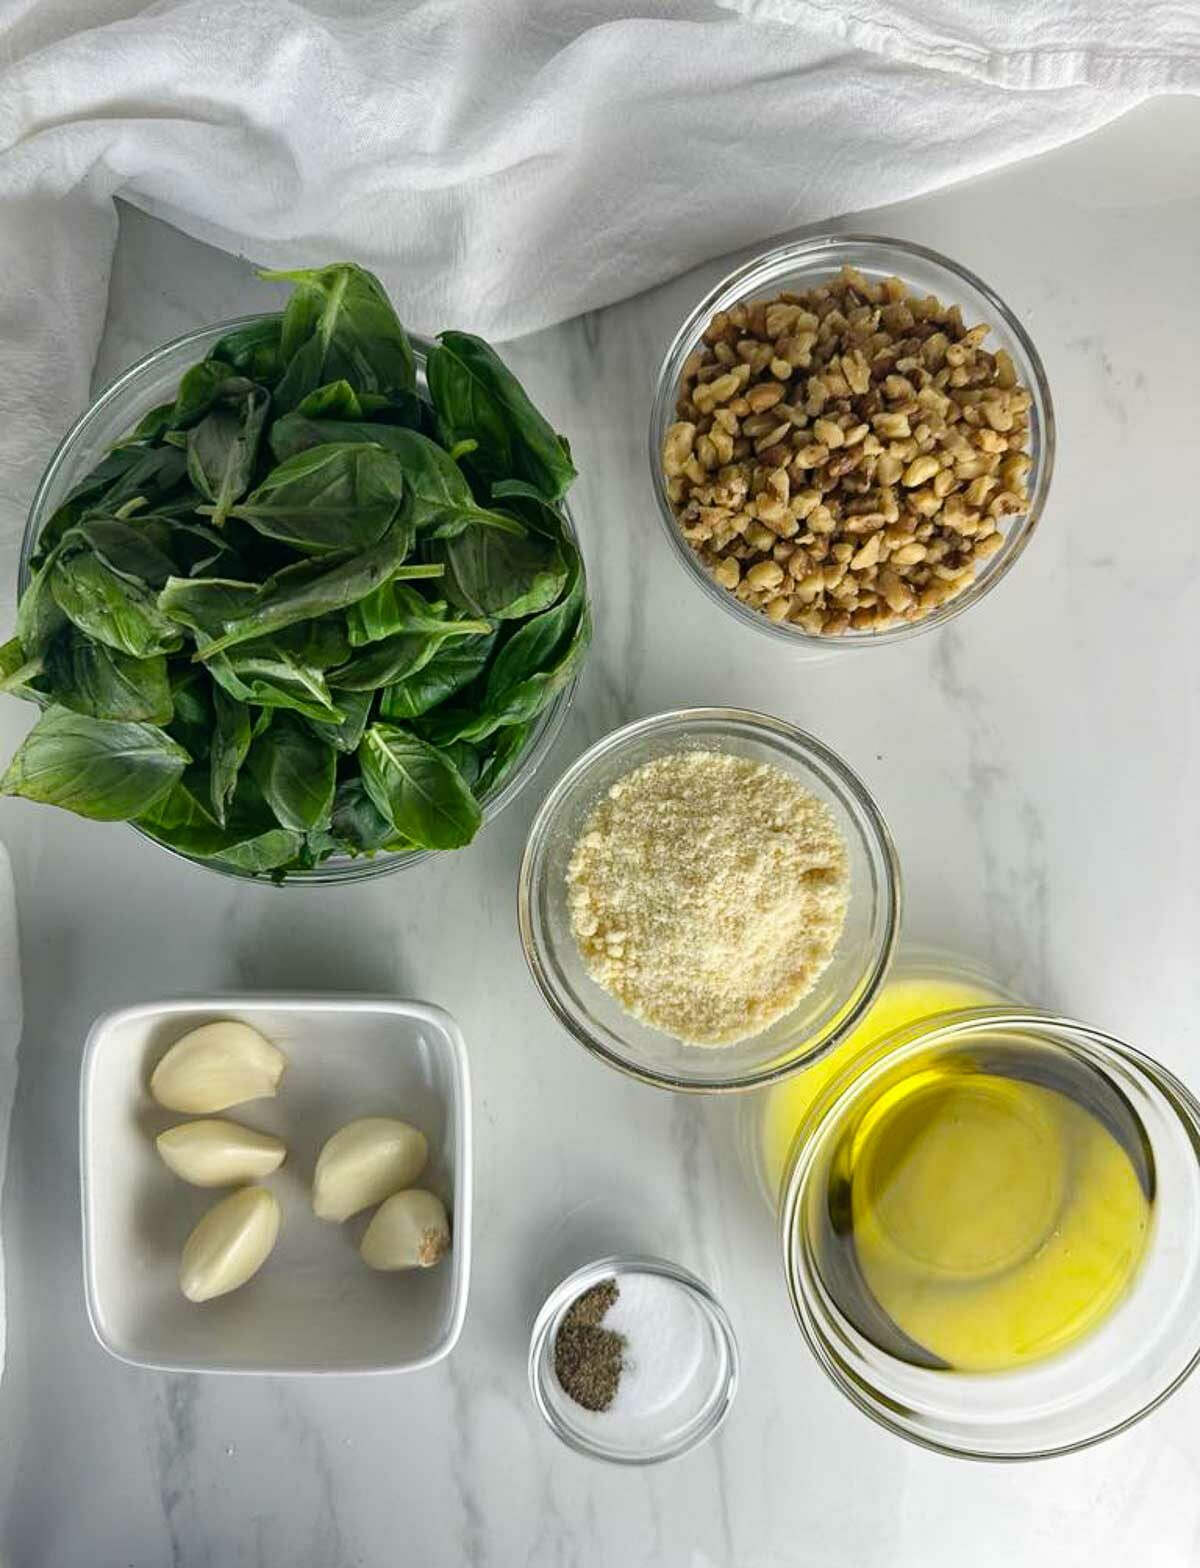 Ingredients for Basil Pesto Sauce with Walnuts: Basil, Walnuts, Garlic, Parmesan Cheese, Salt, Pepper, and Olive Oil